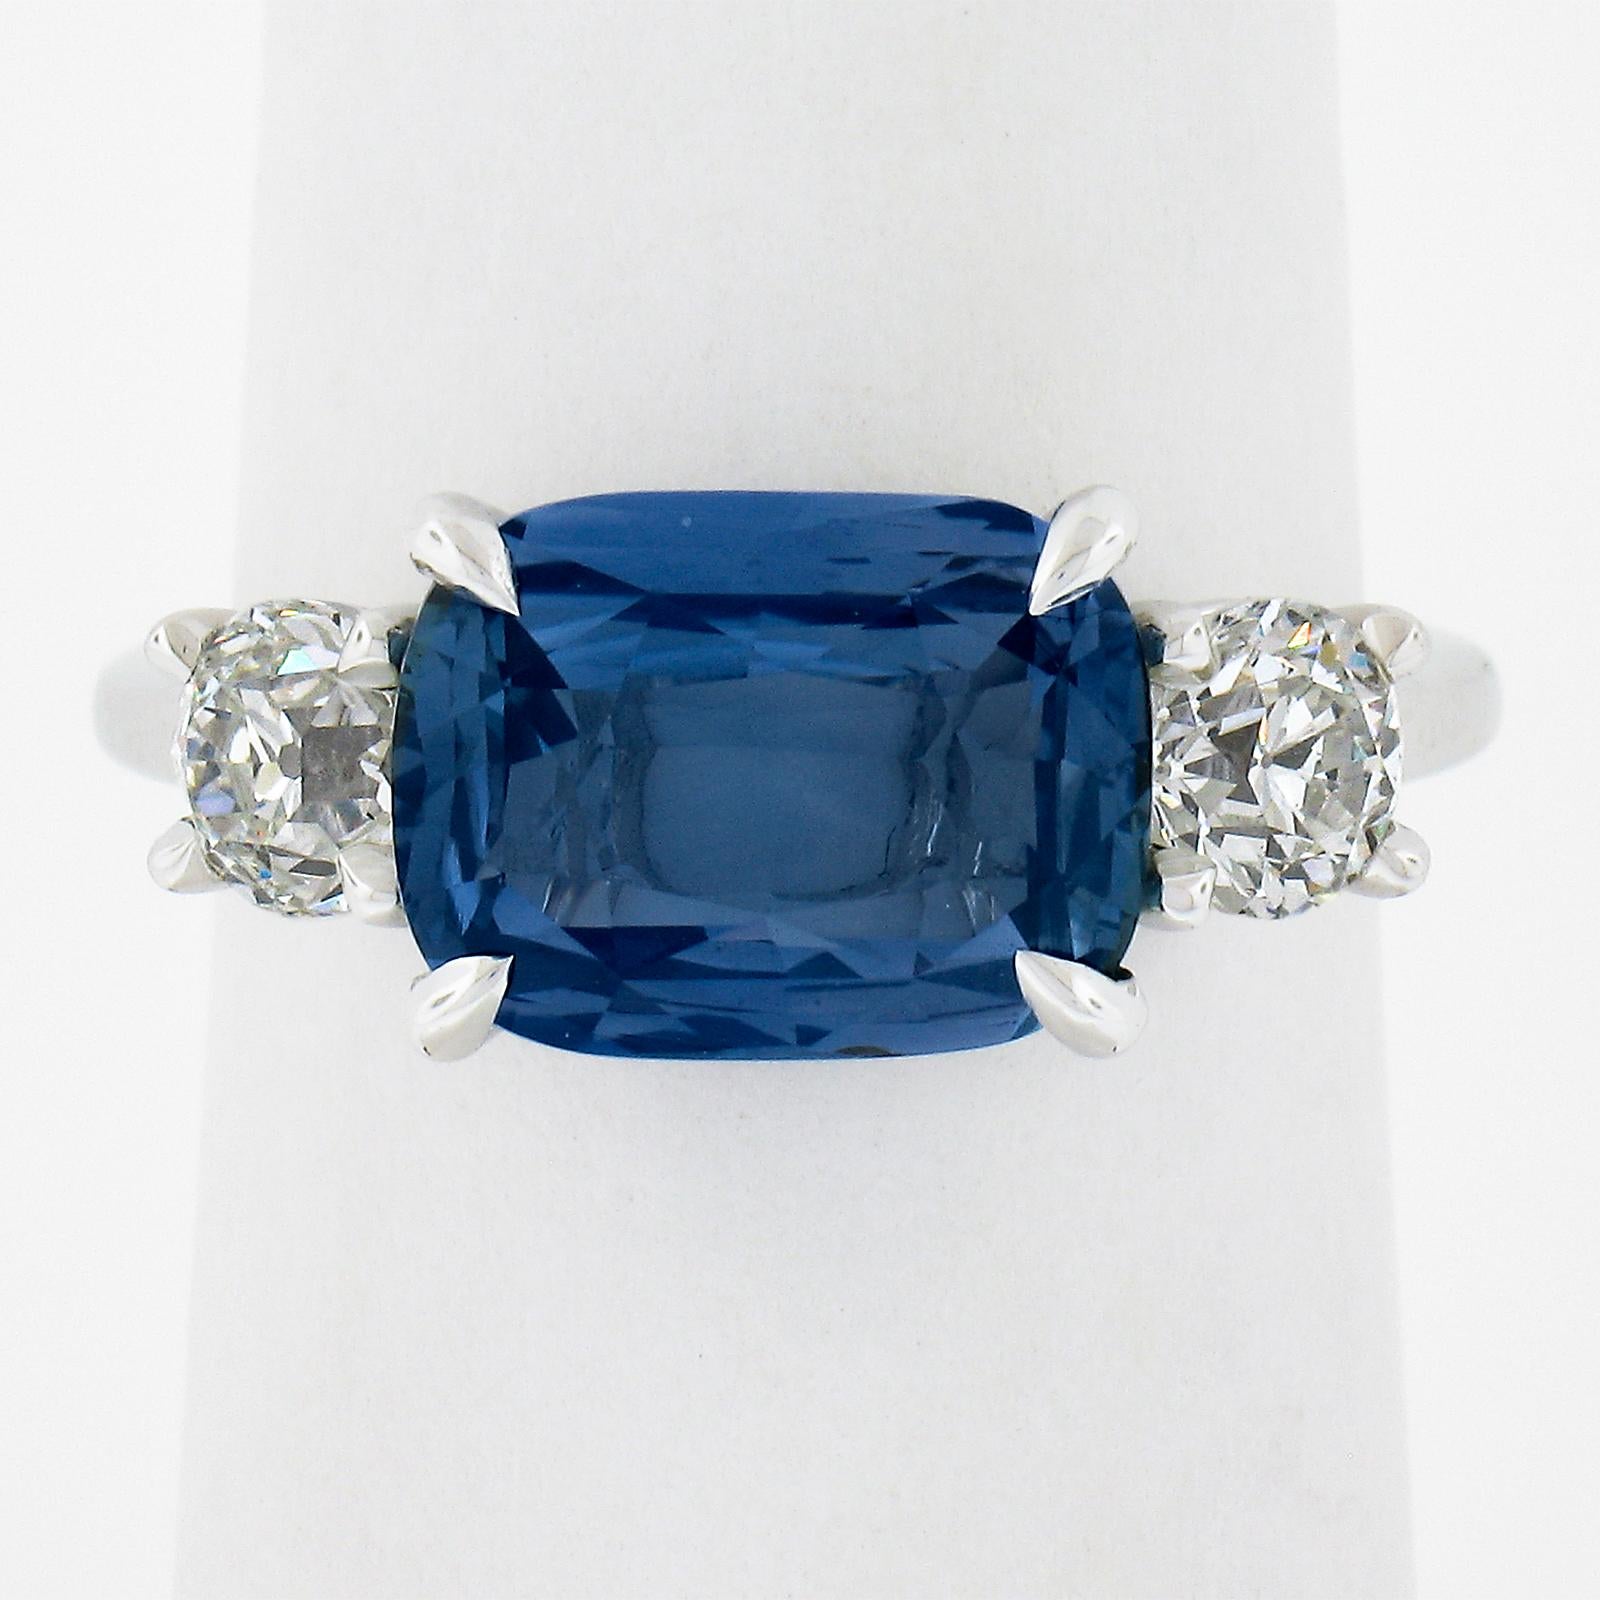 This gorgeous, custom designed, sapphire and diamond ring features a truly breathtaking, GIA certified, cushion cut old sapphire solitaire that is perfectly claw prong set at its center and flanked by two fine quality old European cut diamonds. The